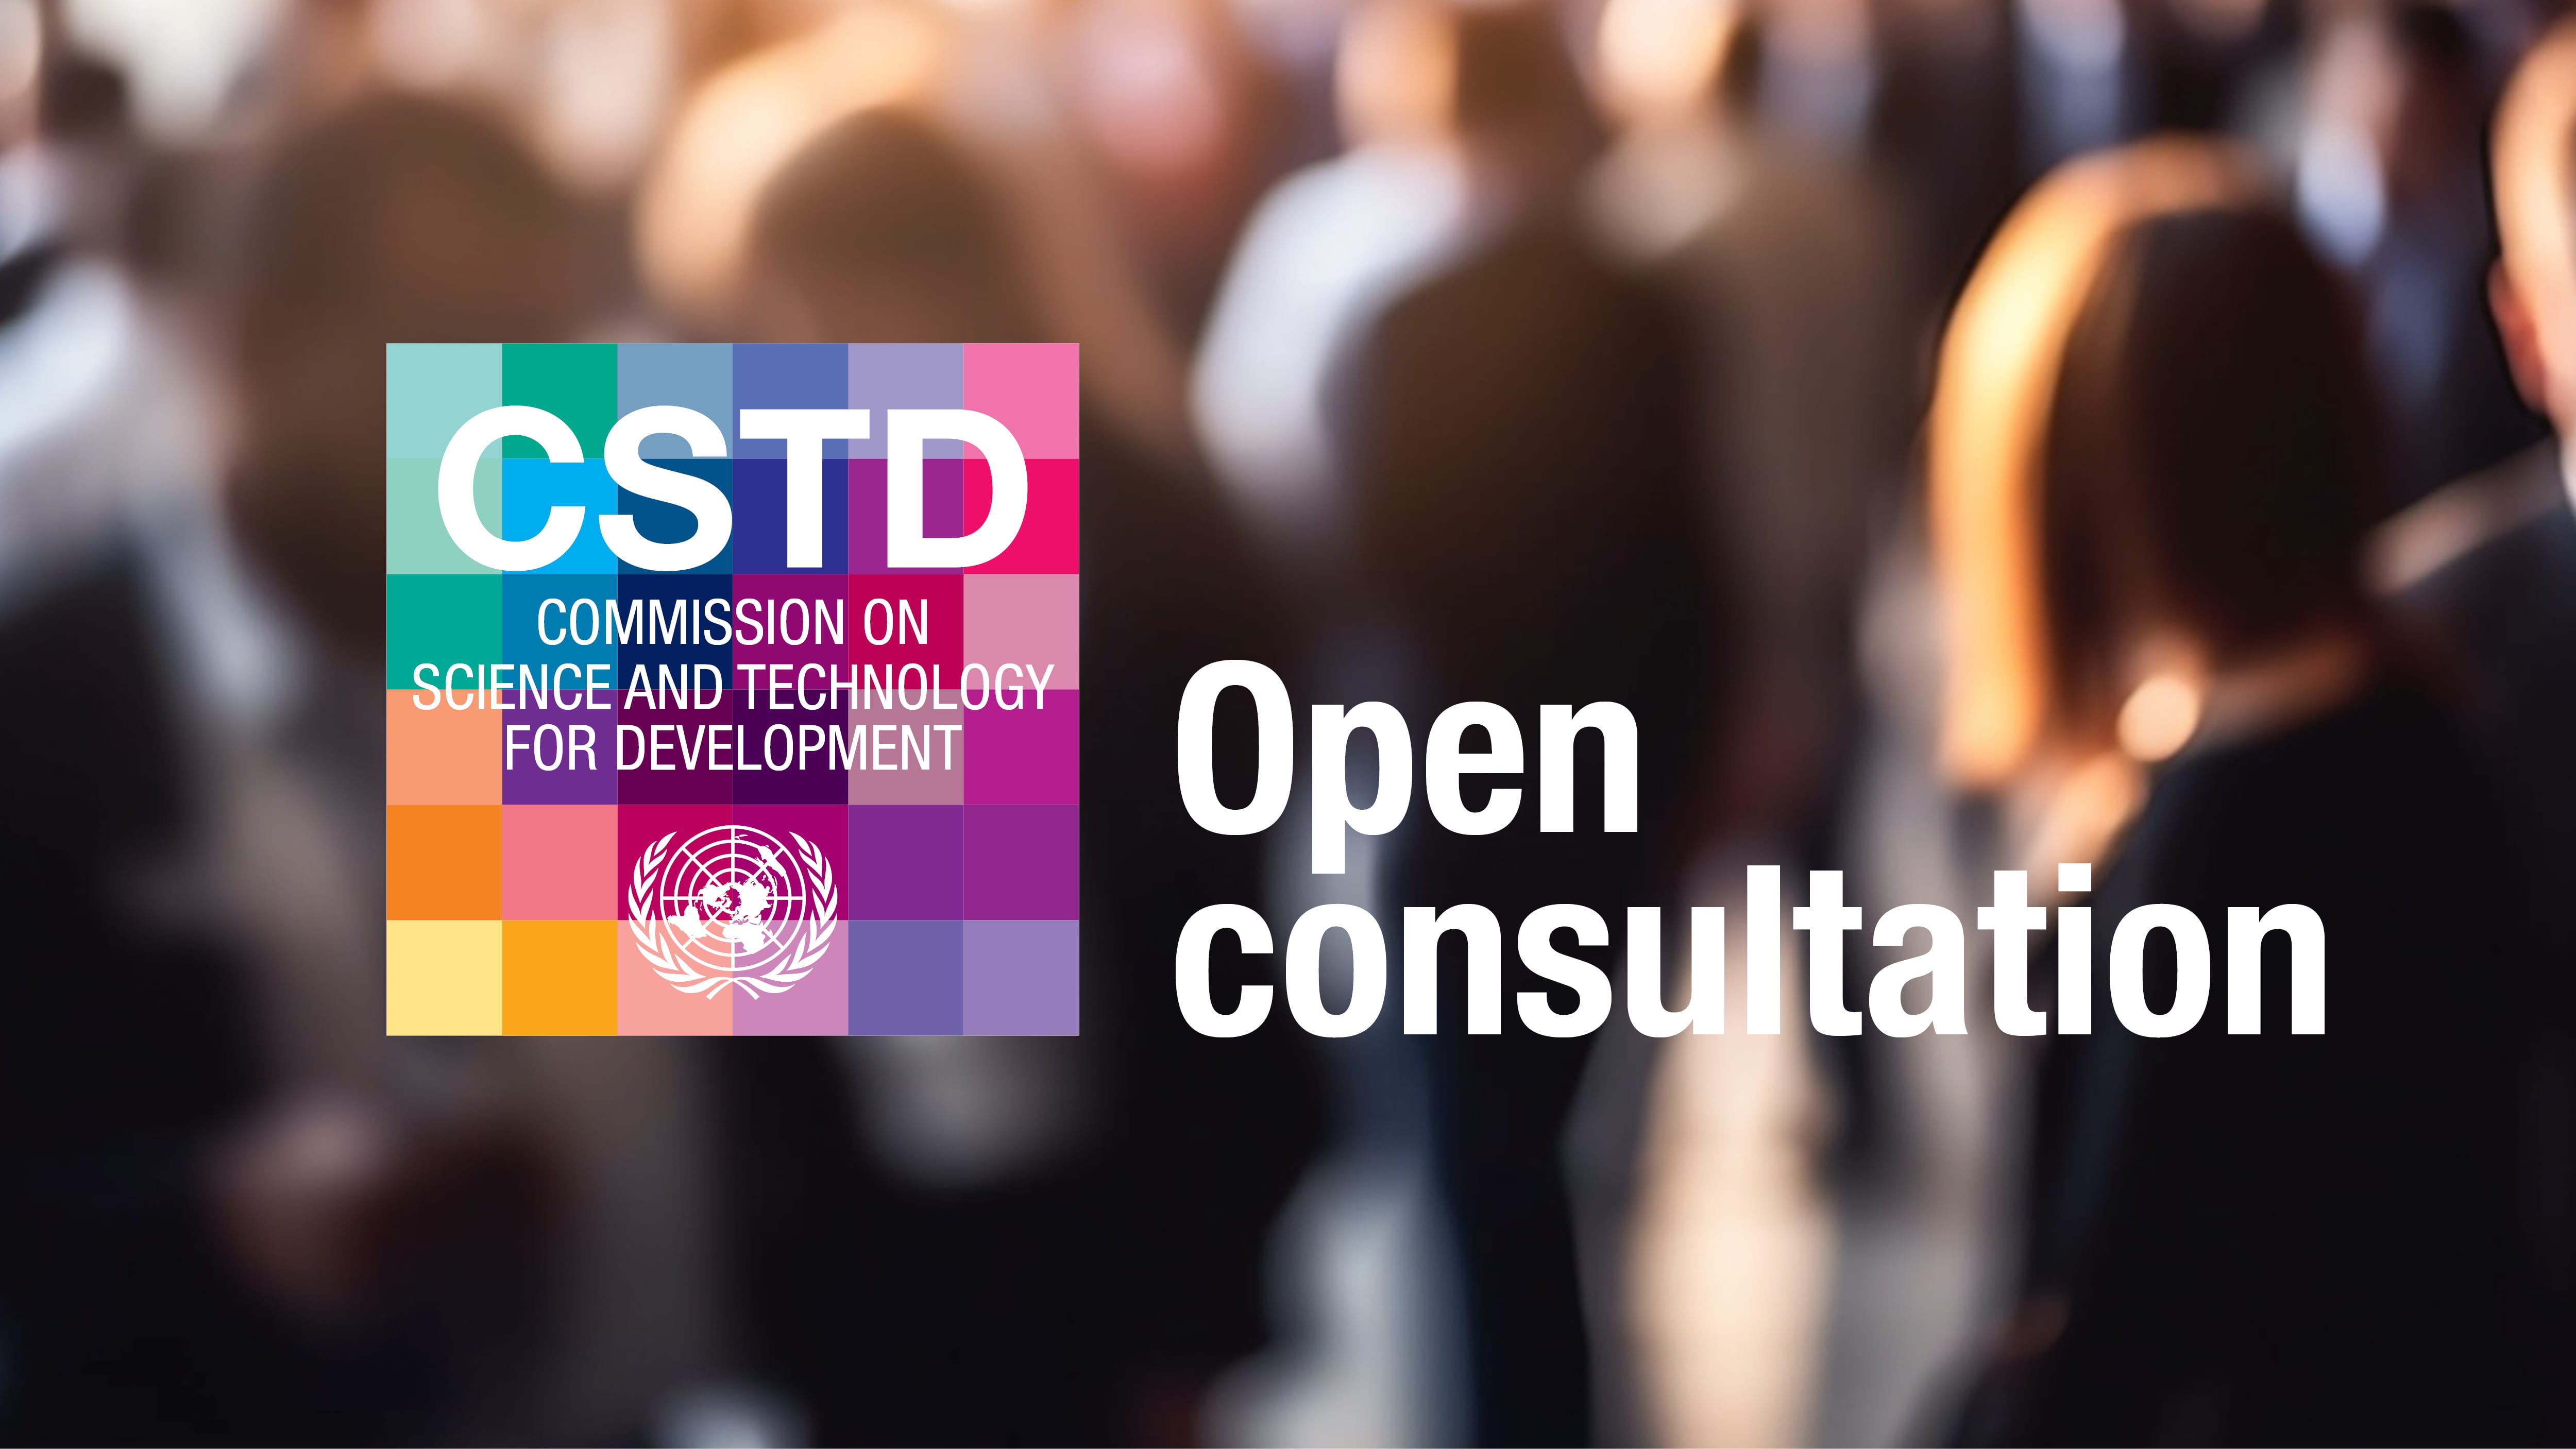 CSTD second open consultation: High-level session at UNCTAD eWeek 2023